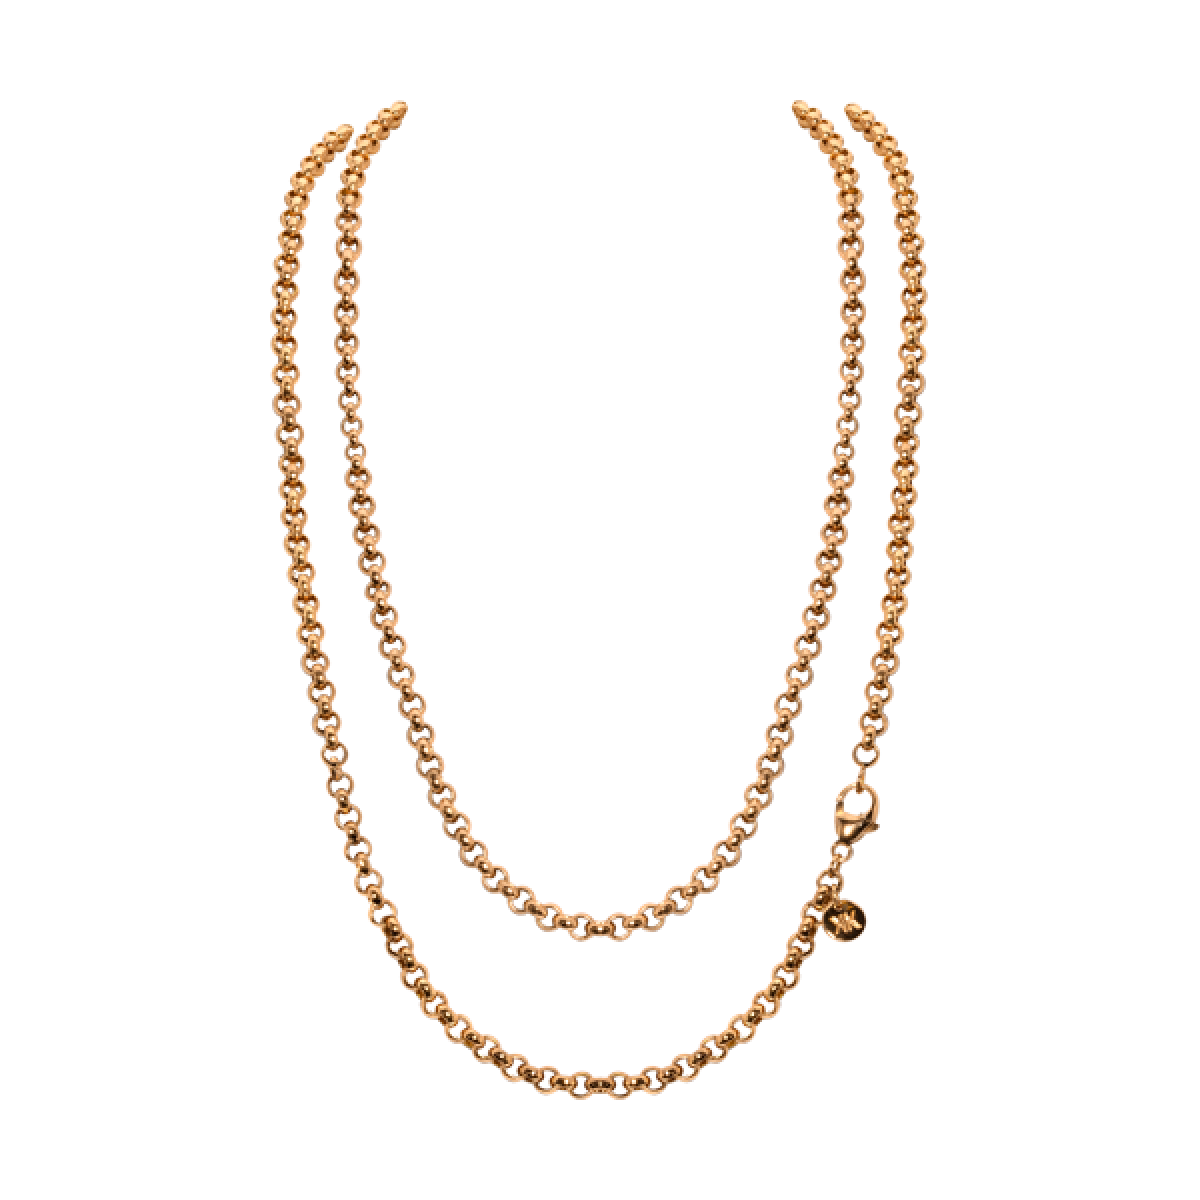 Jewellery Chain PNG Pic